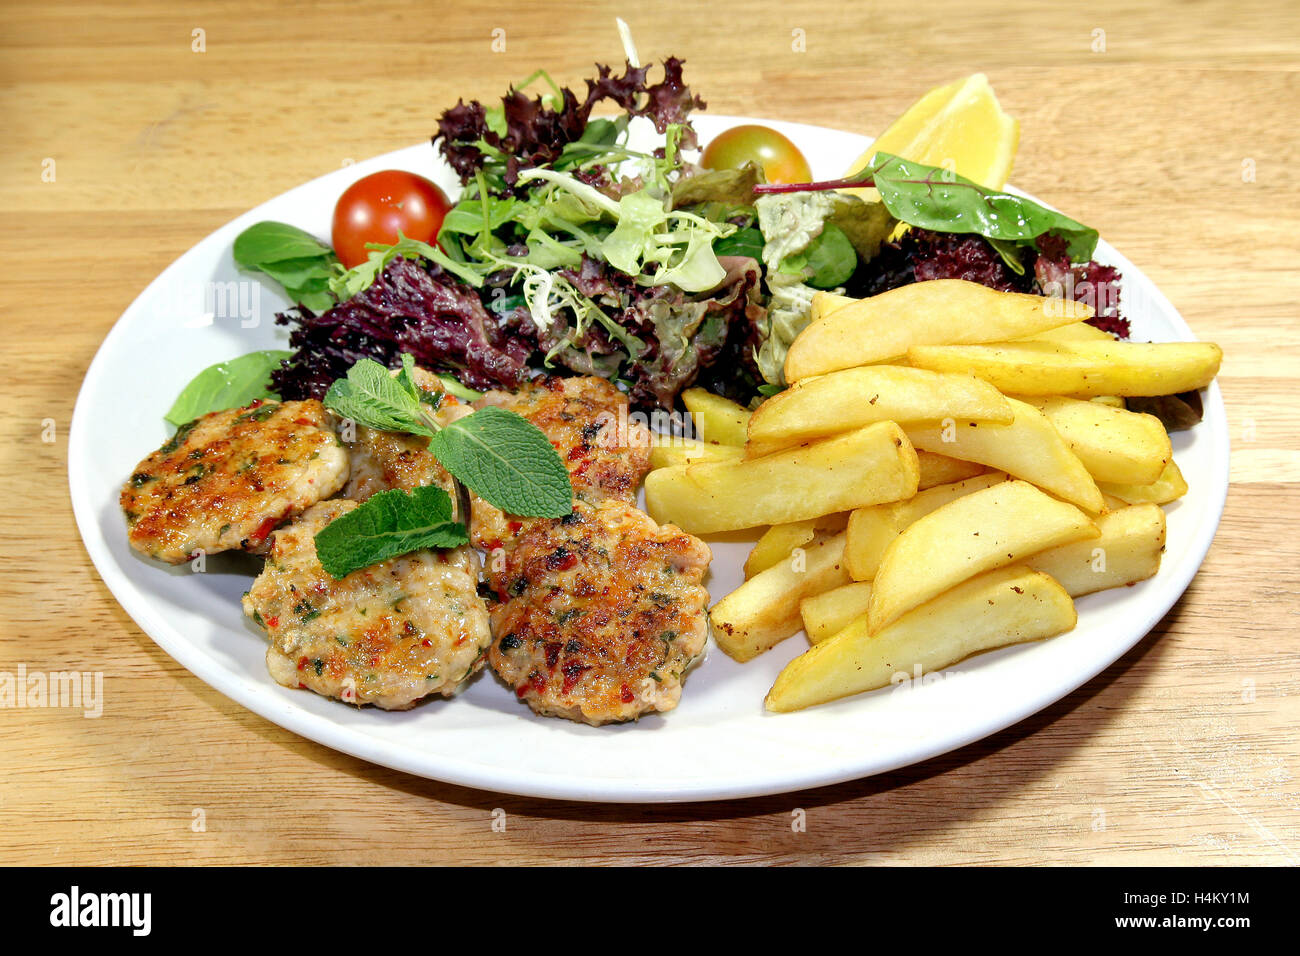 Grilled Chicken Meatball served with fries and salad Stock Photo